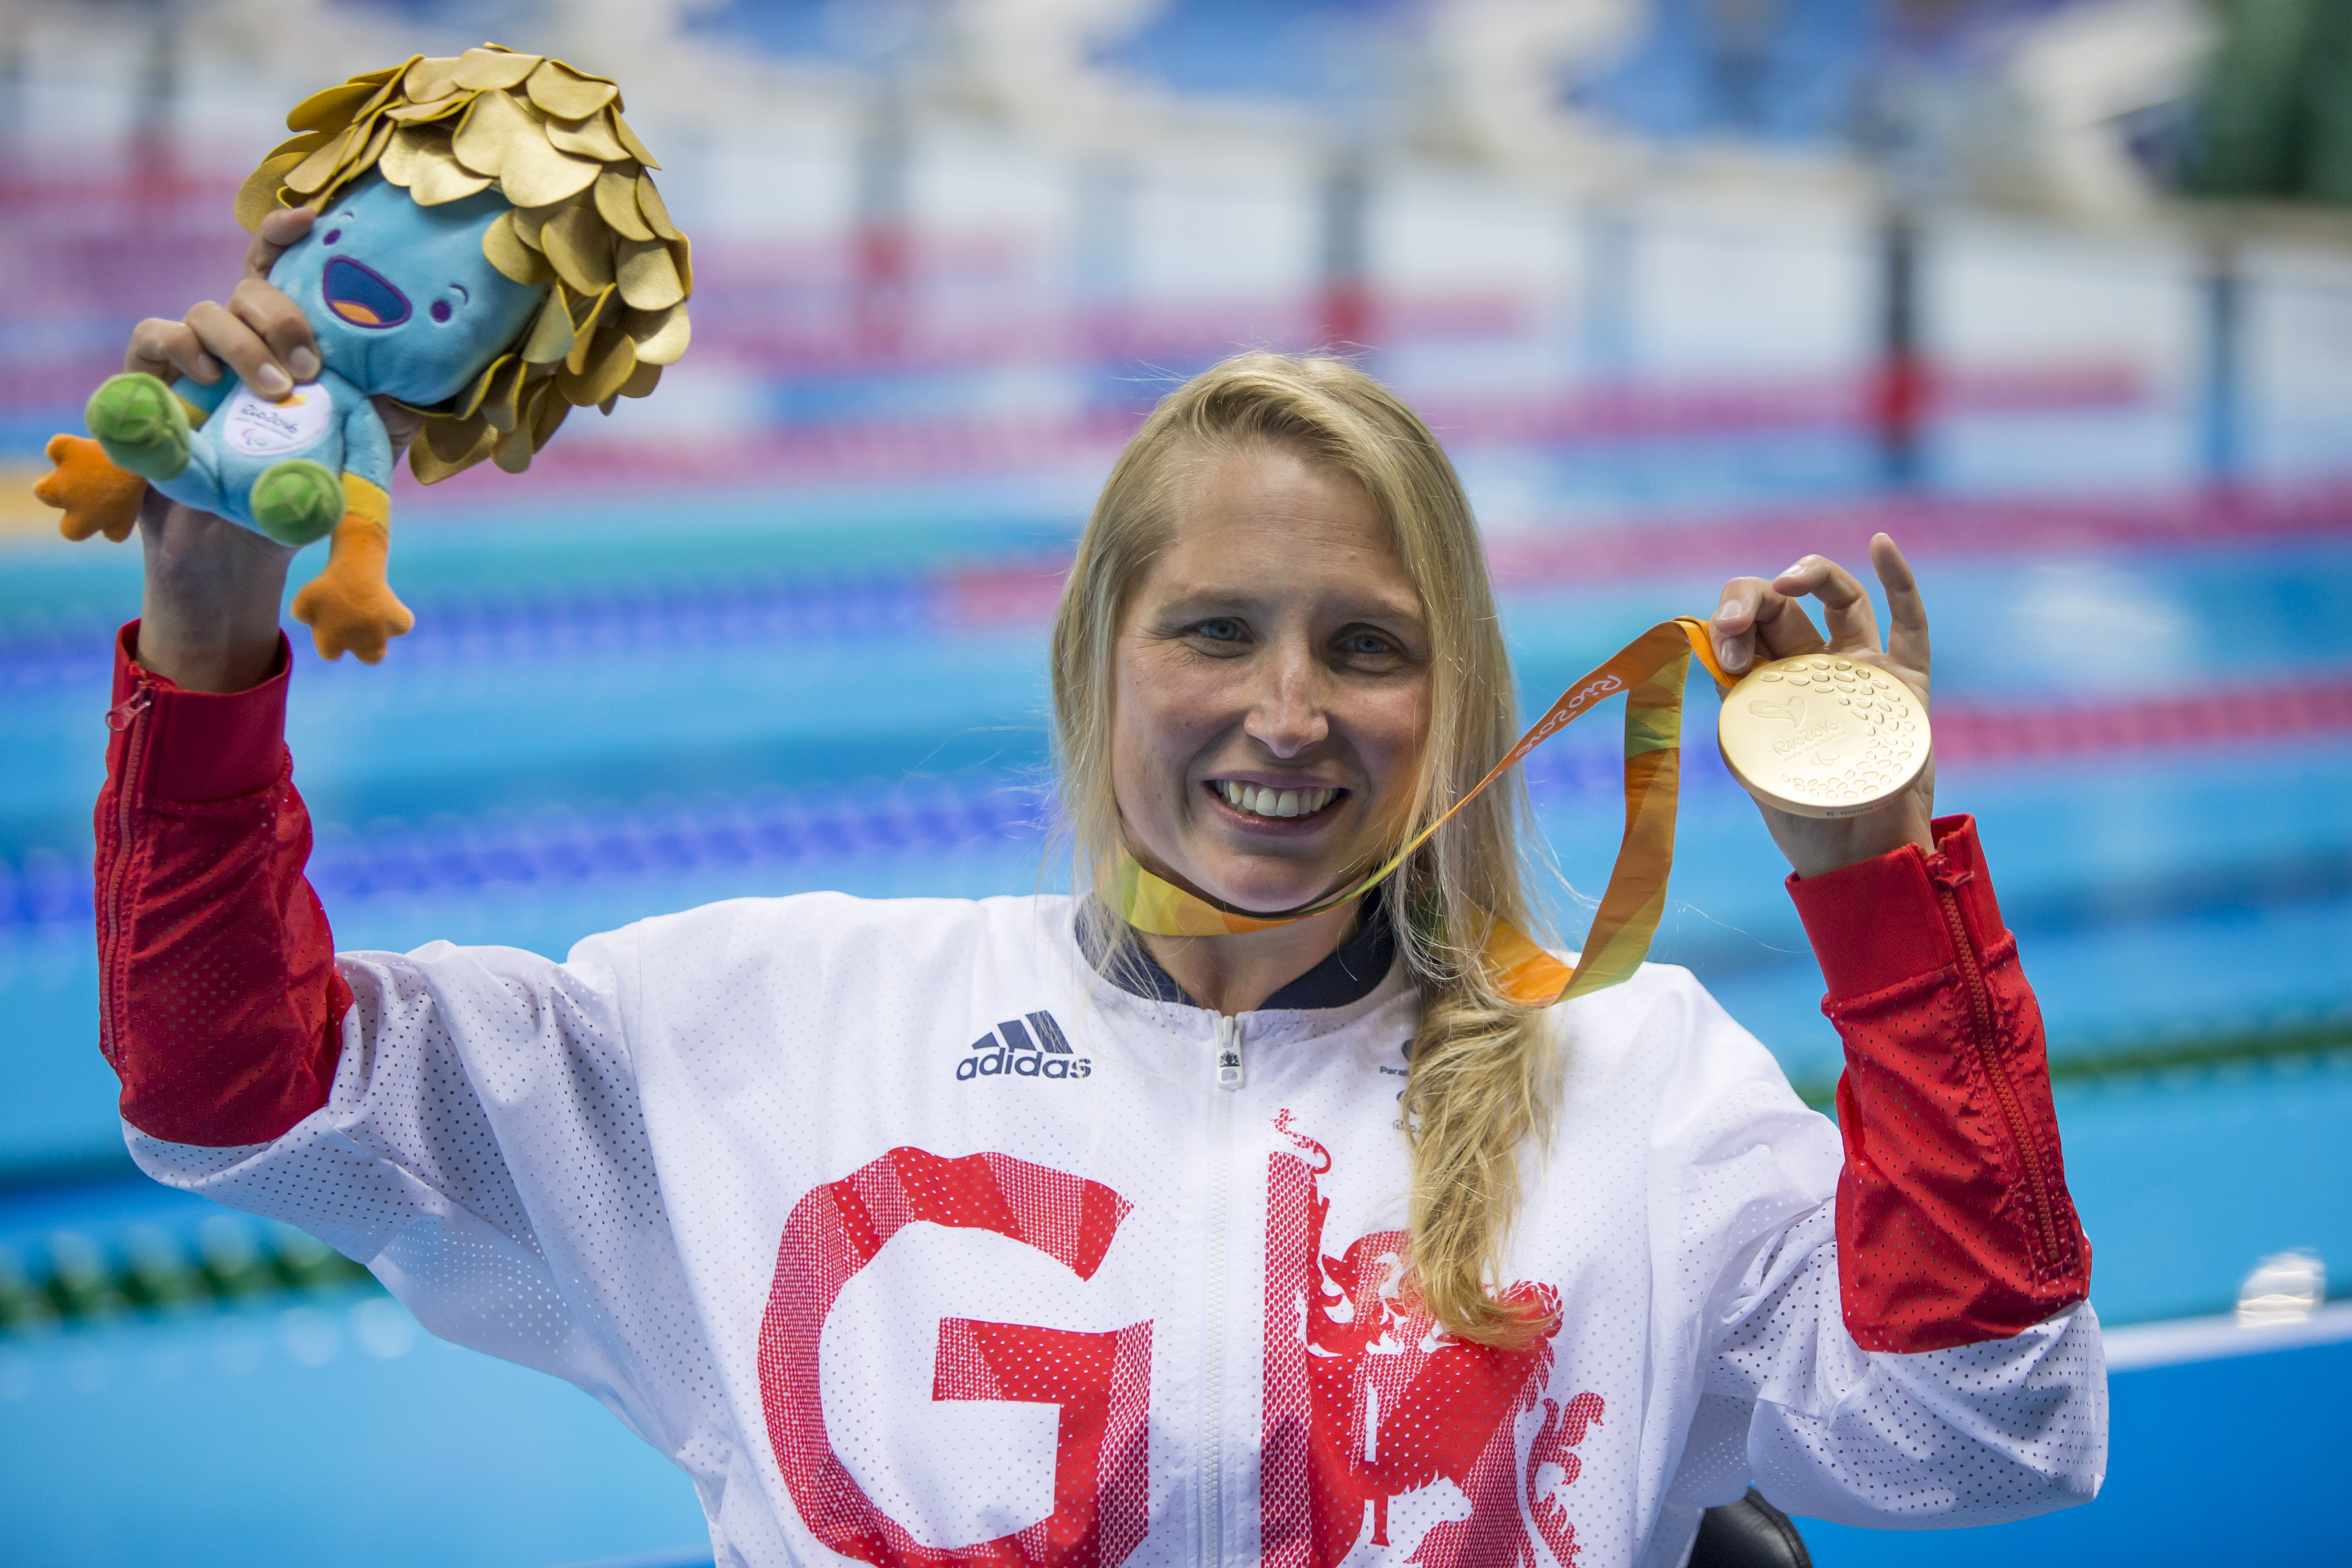 Steph Millward with her gold medal from 100m Backstroke S8